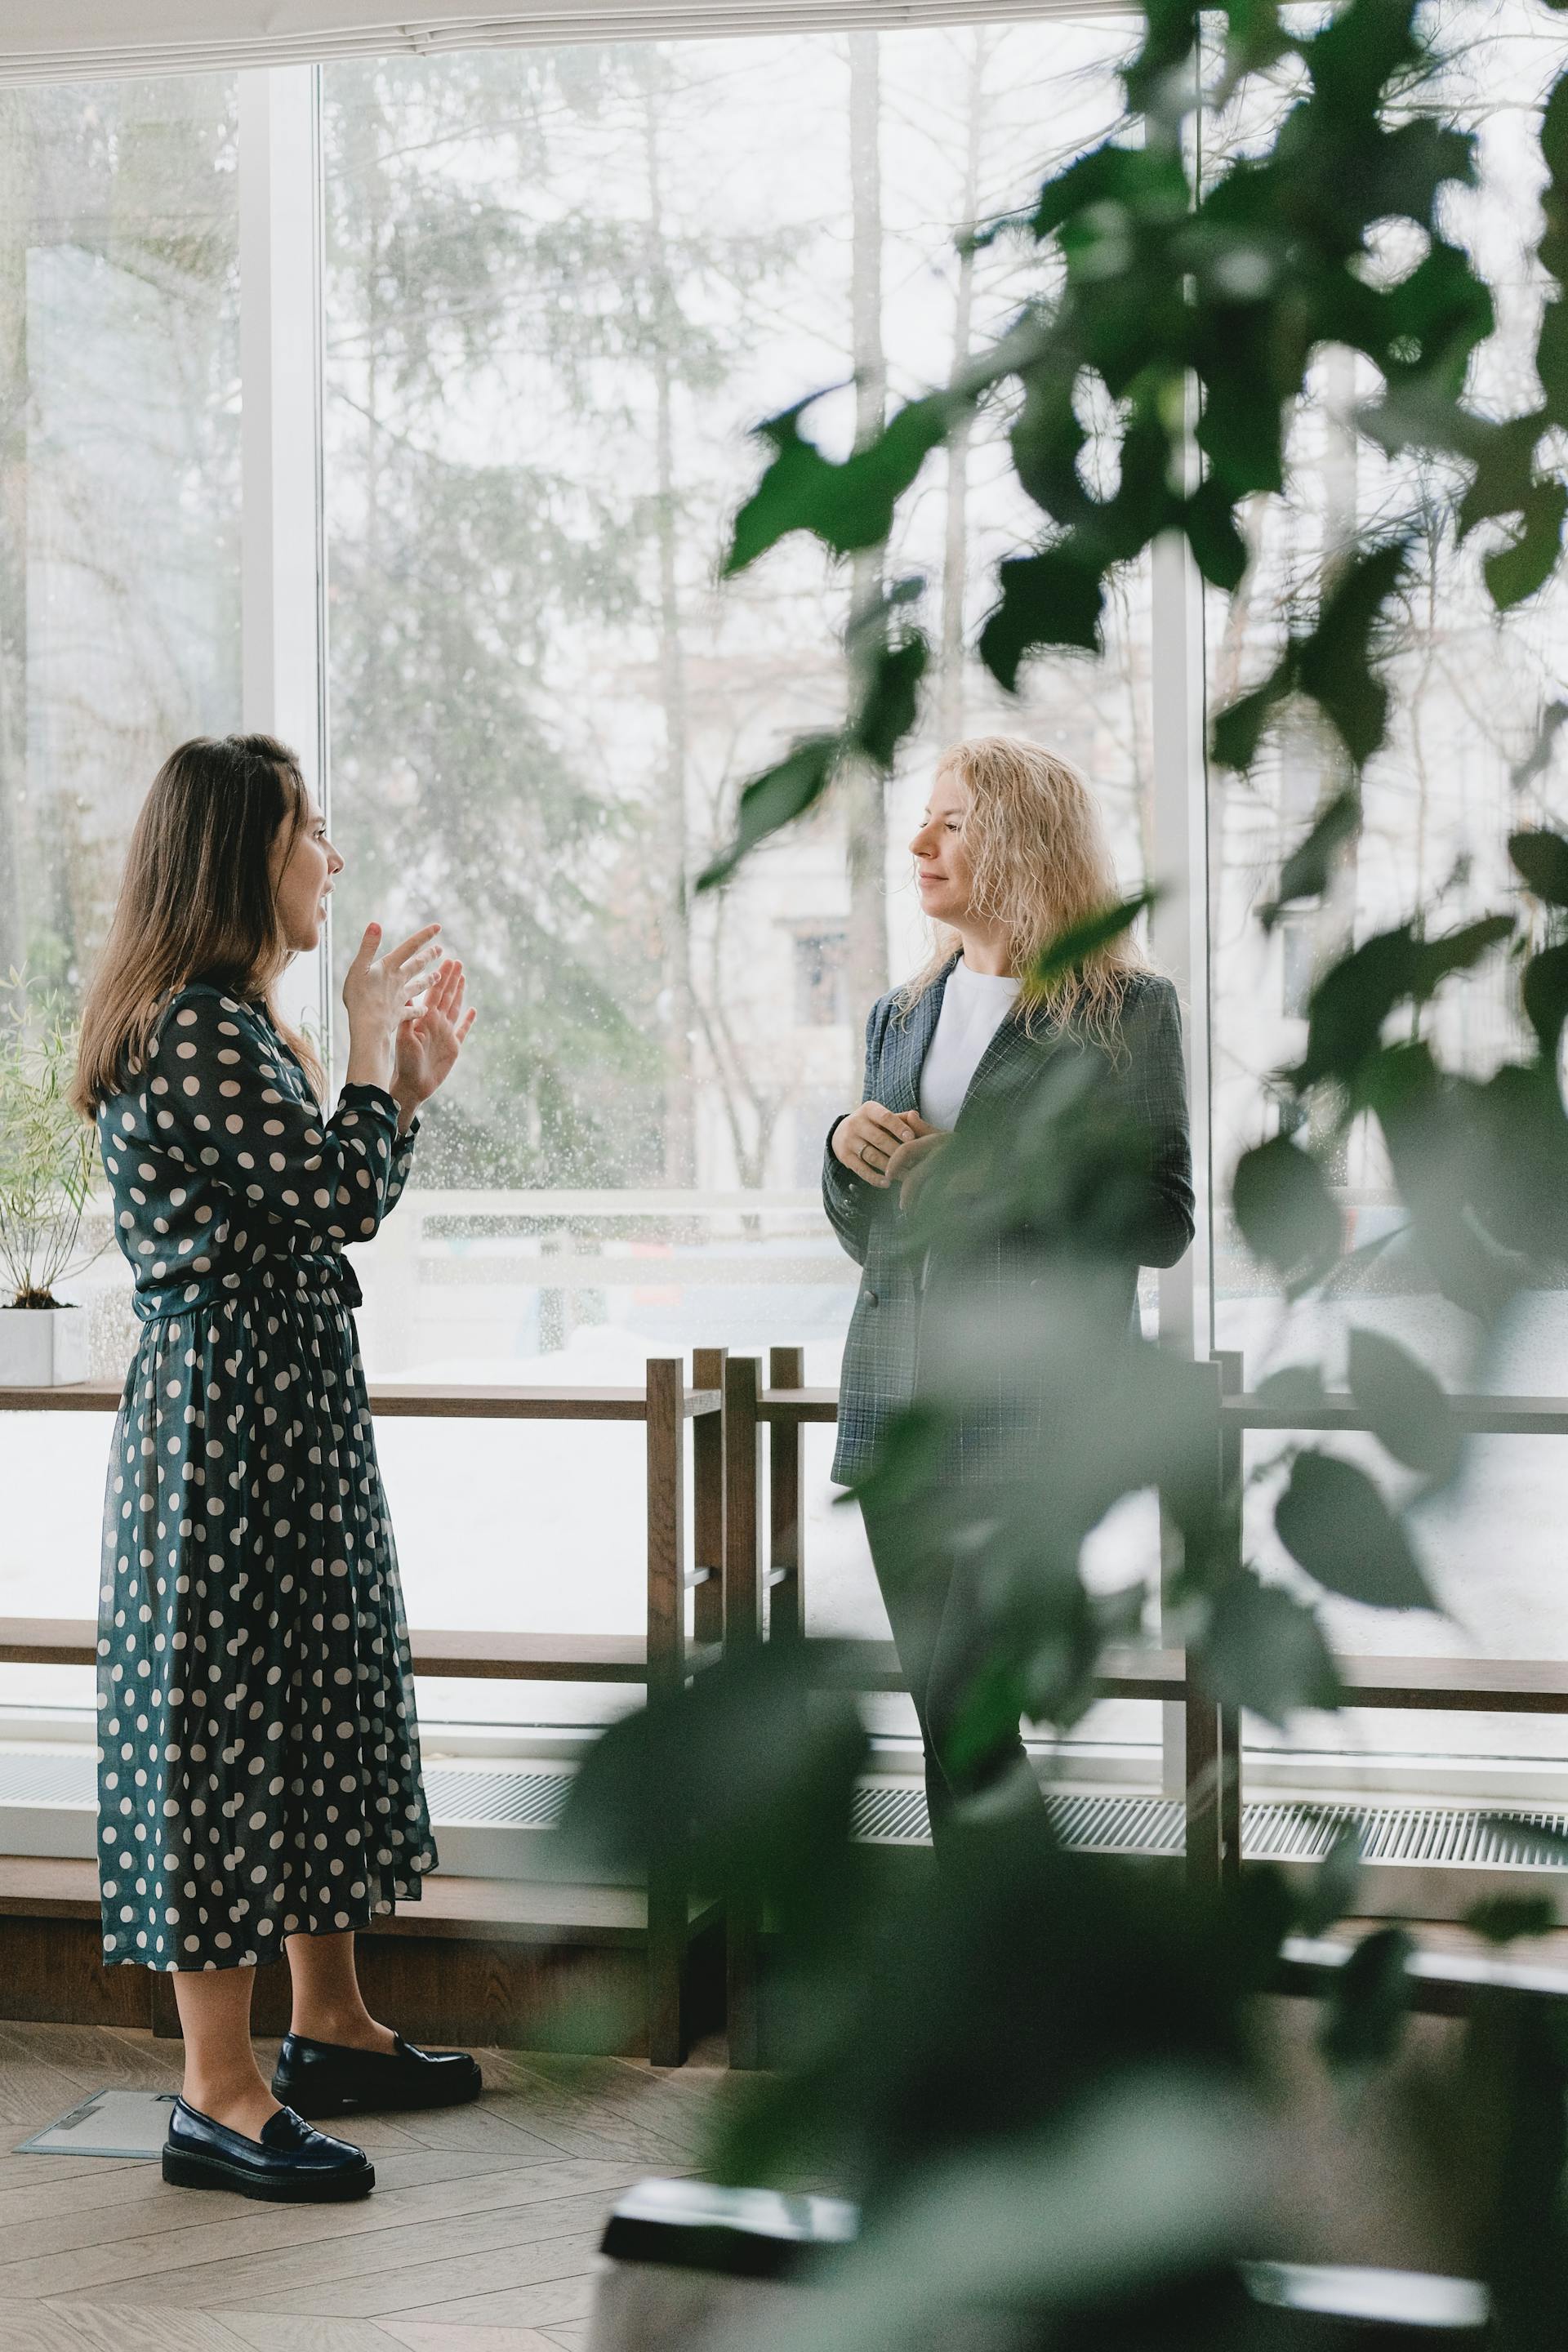 Two female coworkers chatting in the office | Source: Pexels